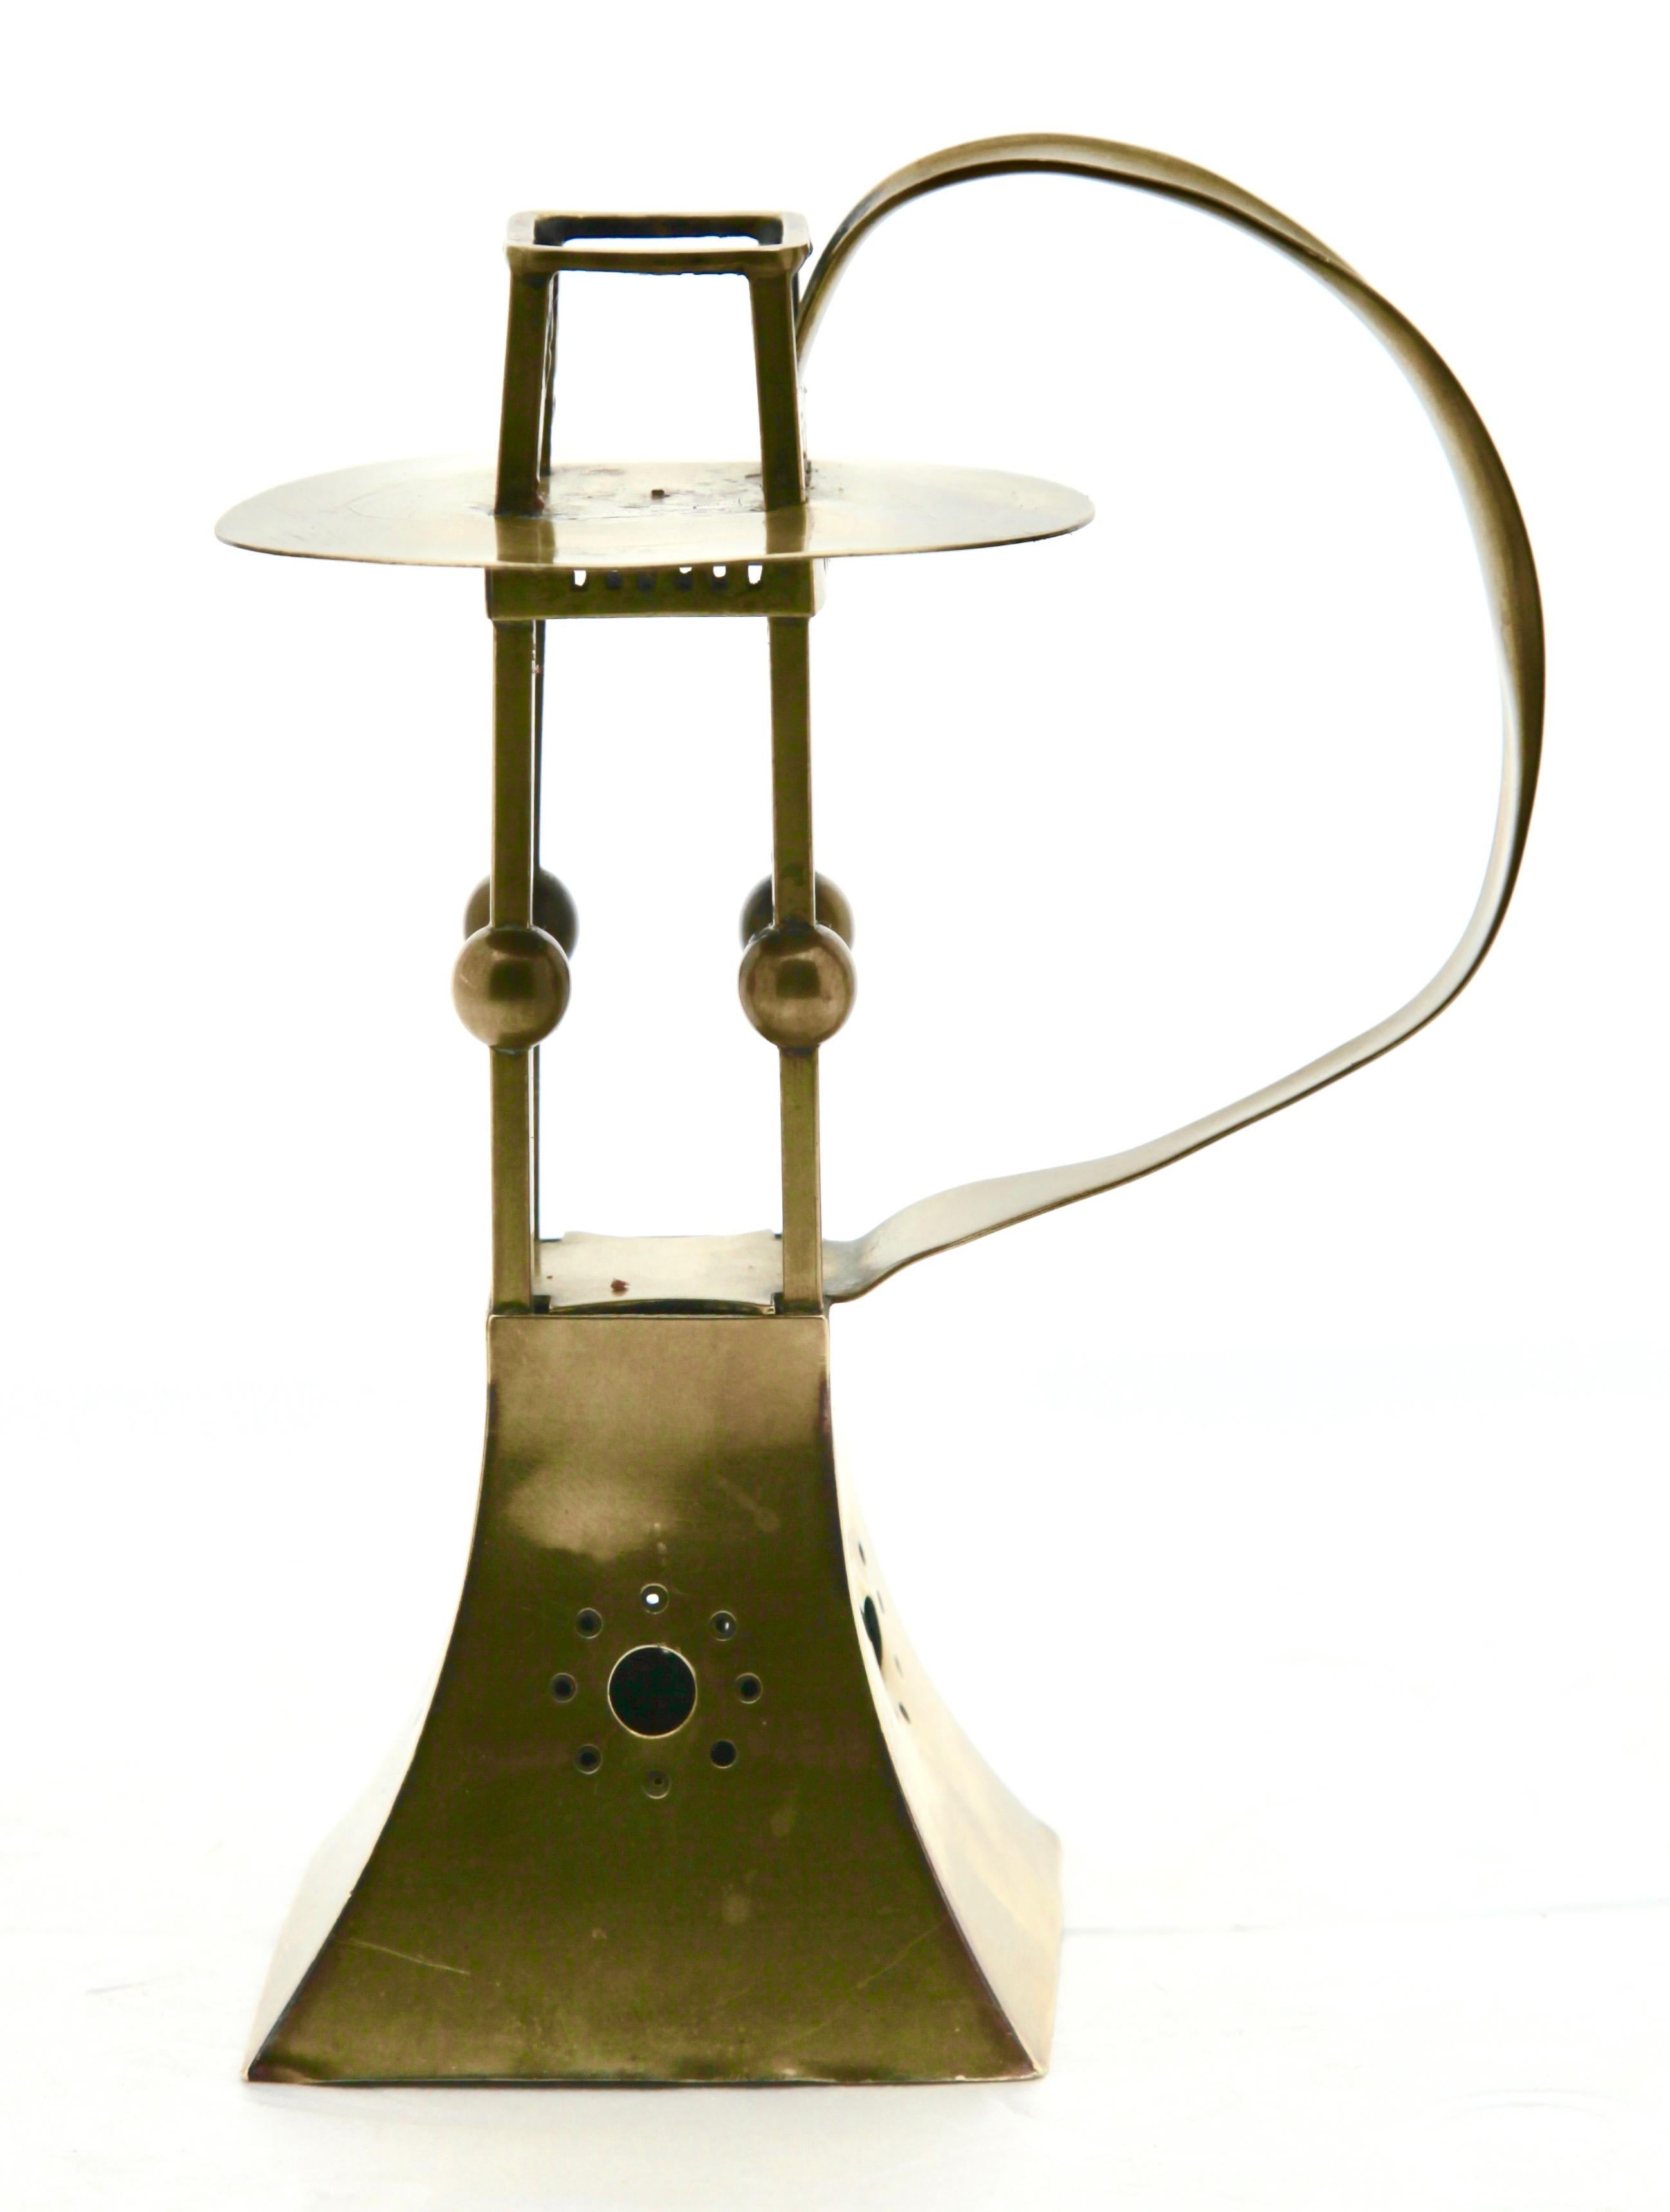 Early 20th Century Carl Deffner, Esslingen Arts & Crafts Copper and Brass Candleholder, circa 1900